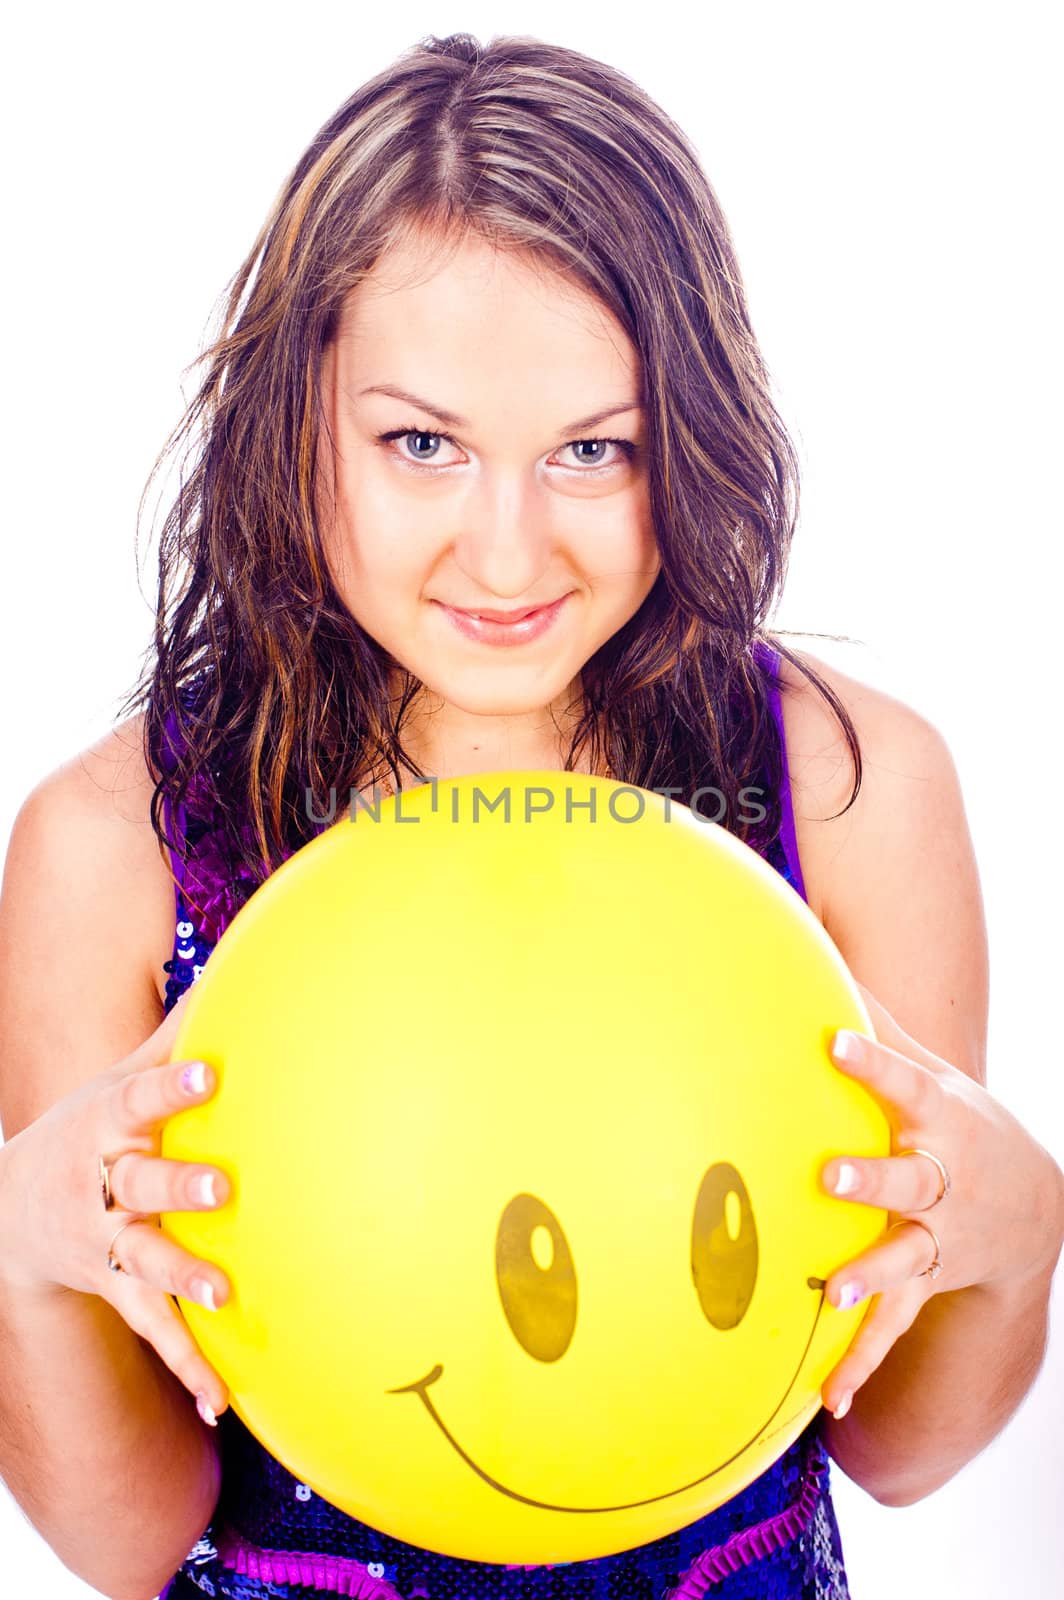 Woman with ballons in studio isolated on white